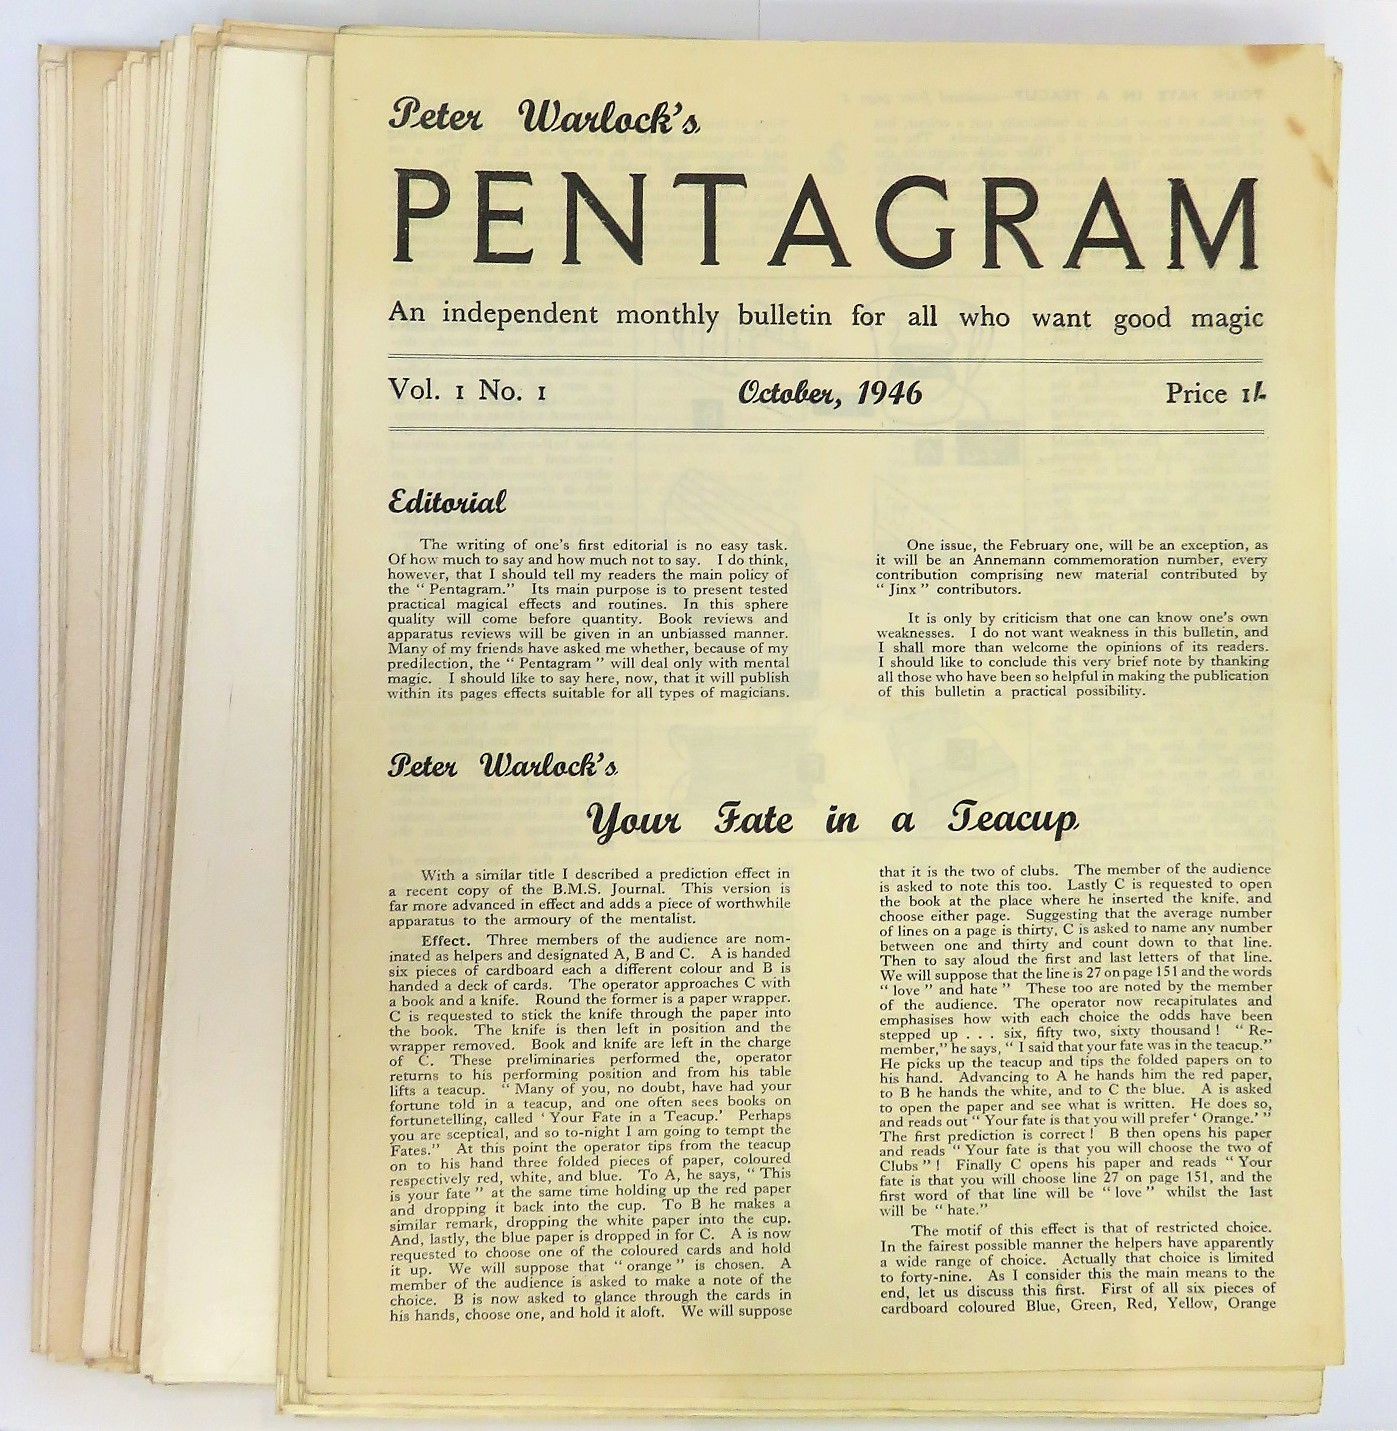 Peter Warlock's Pentagram Magazine from October 1946 through to September 1950 housed in a case